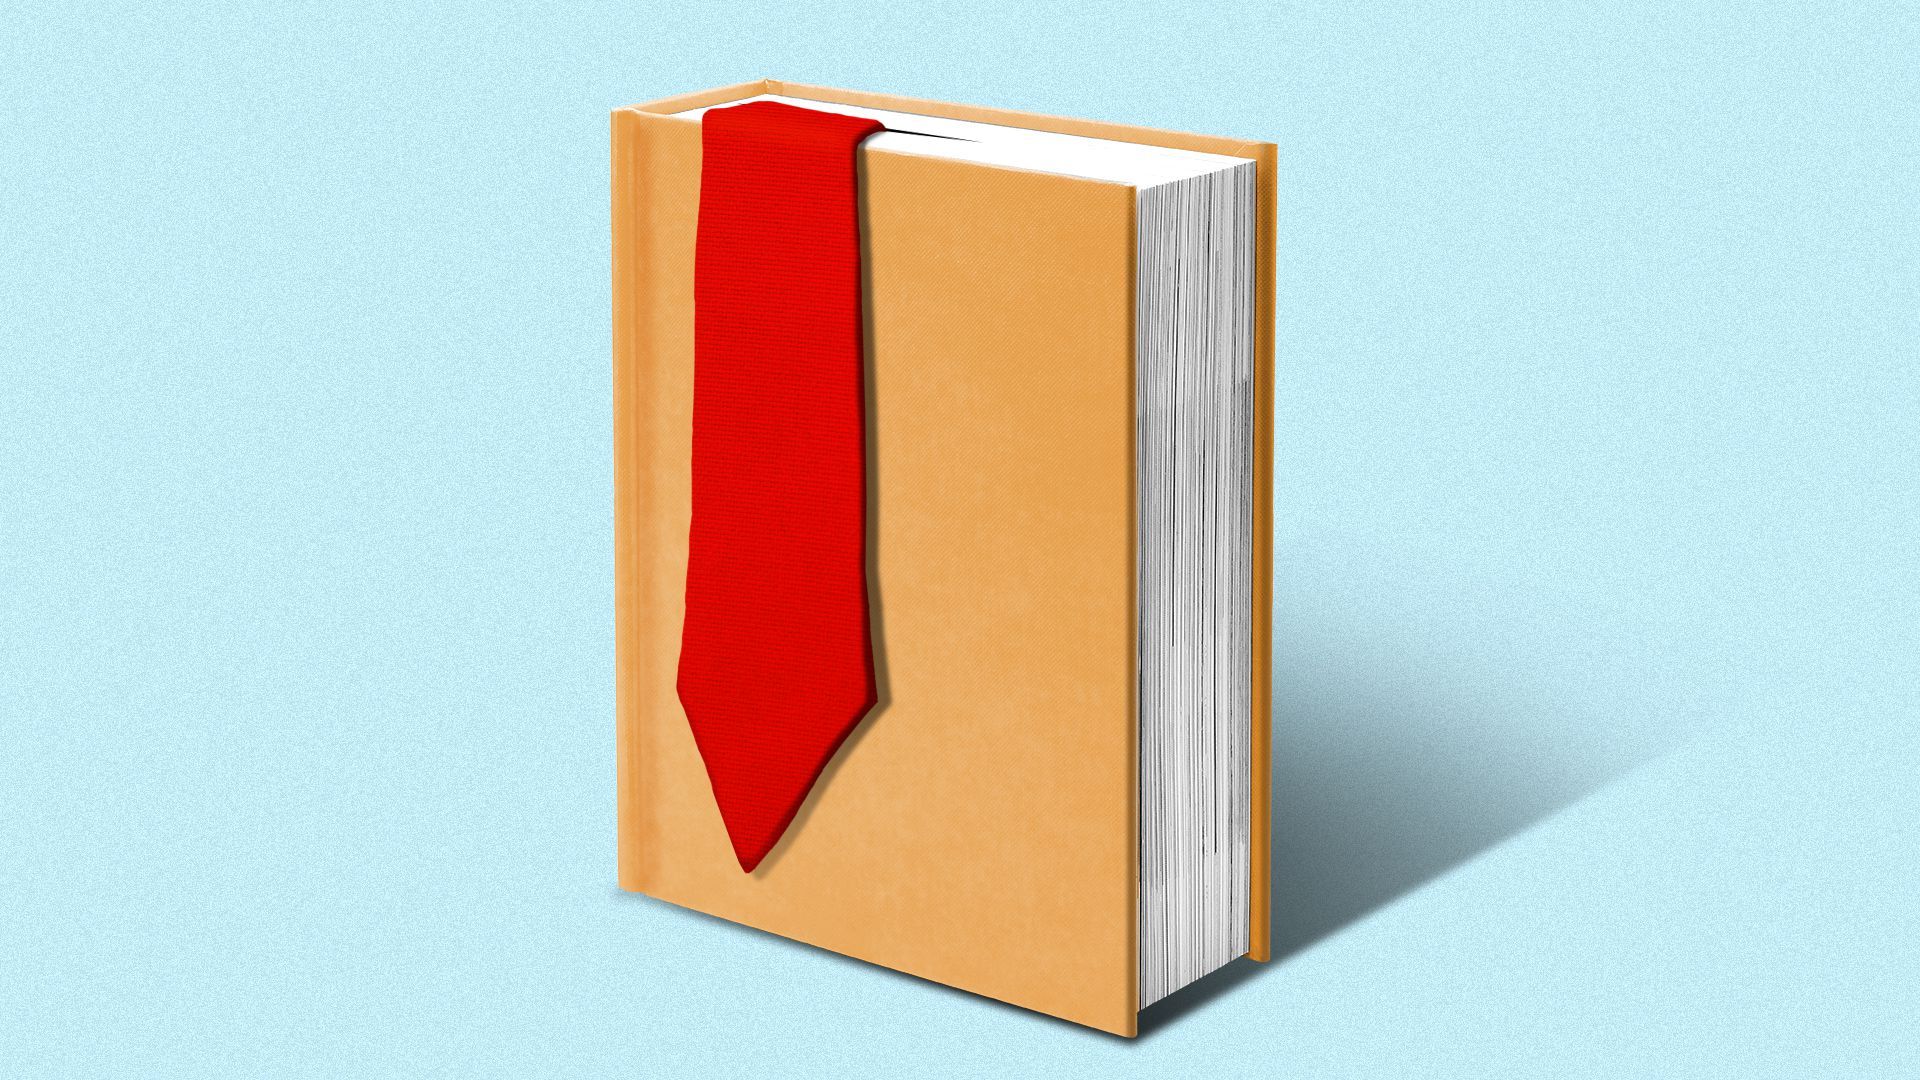 Illustration of an orange book with a red tie bookmark